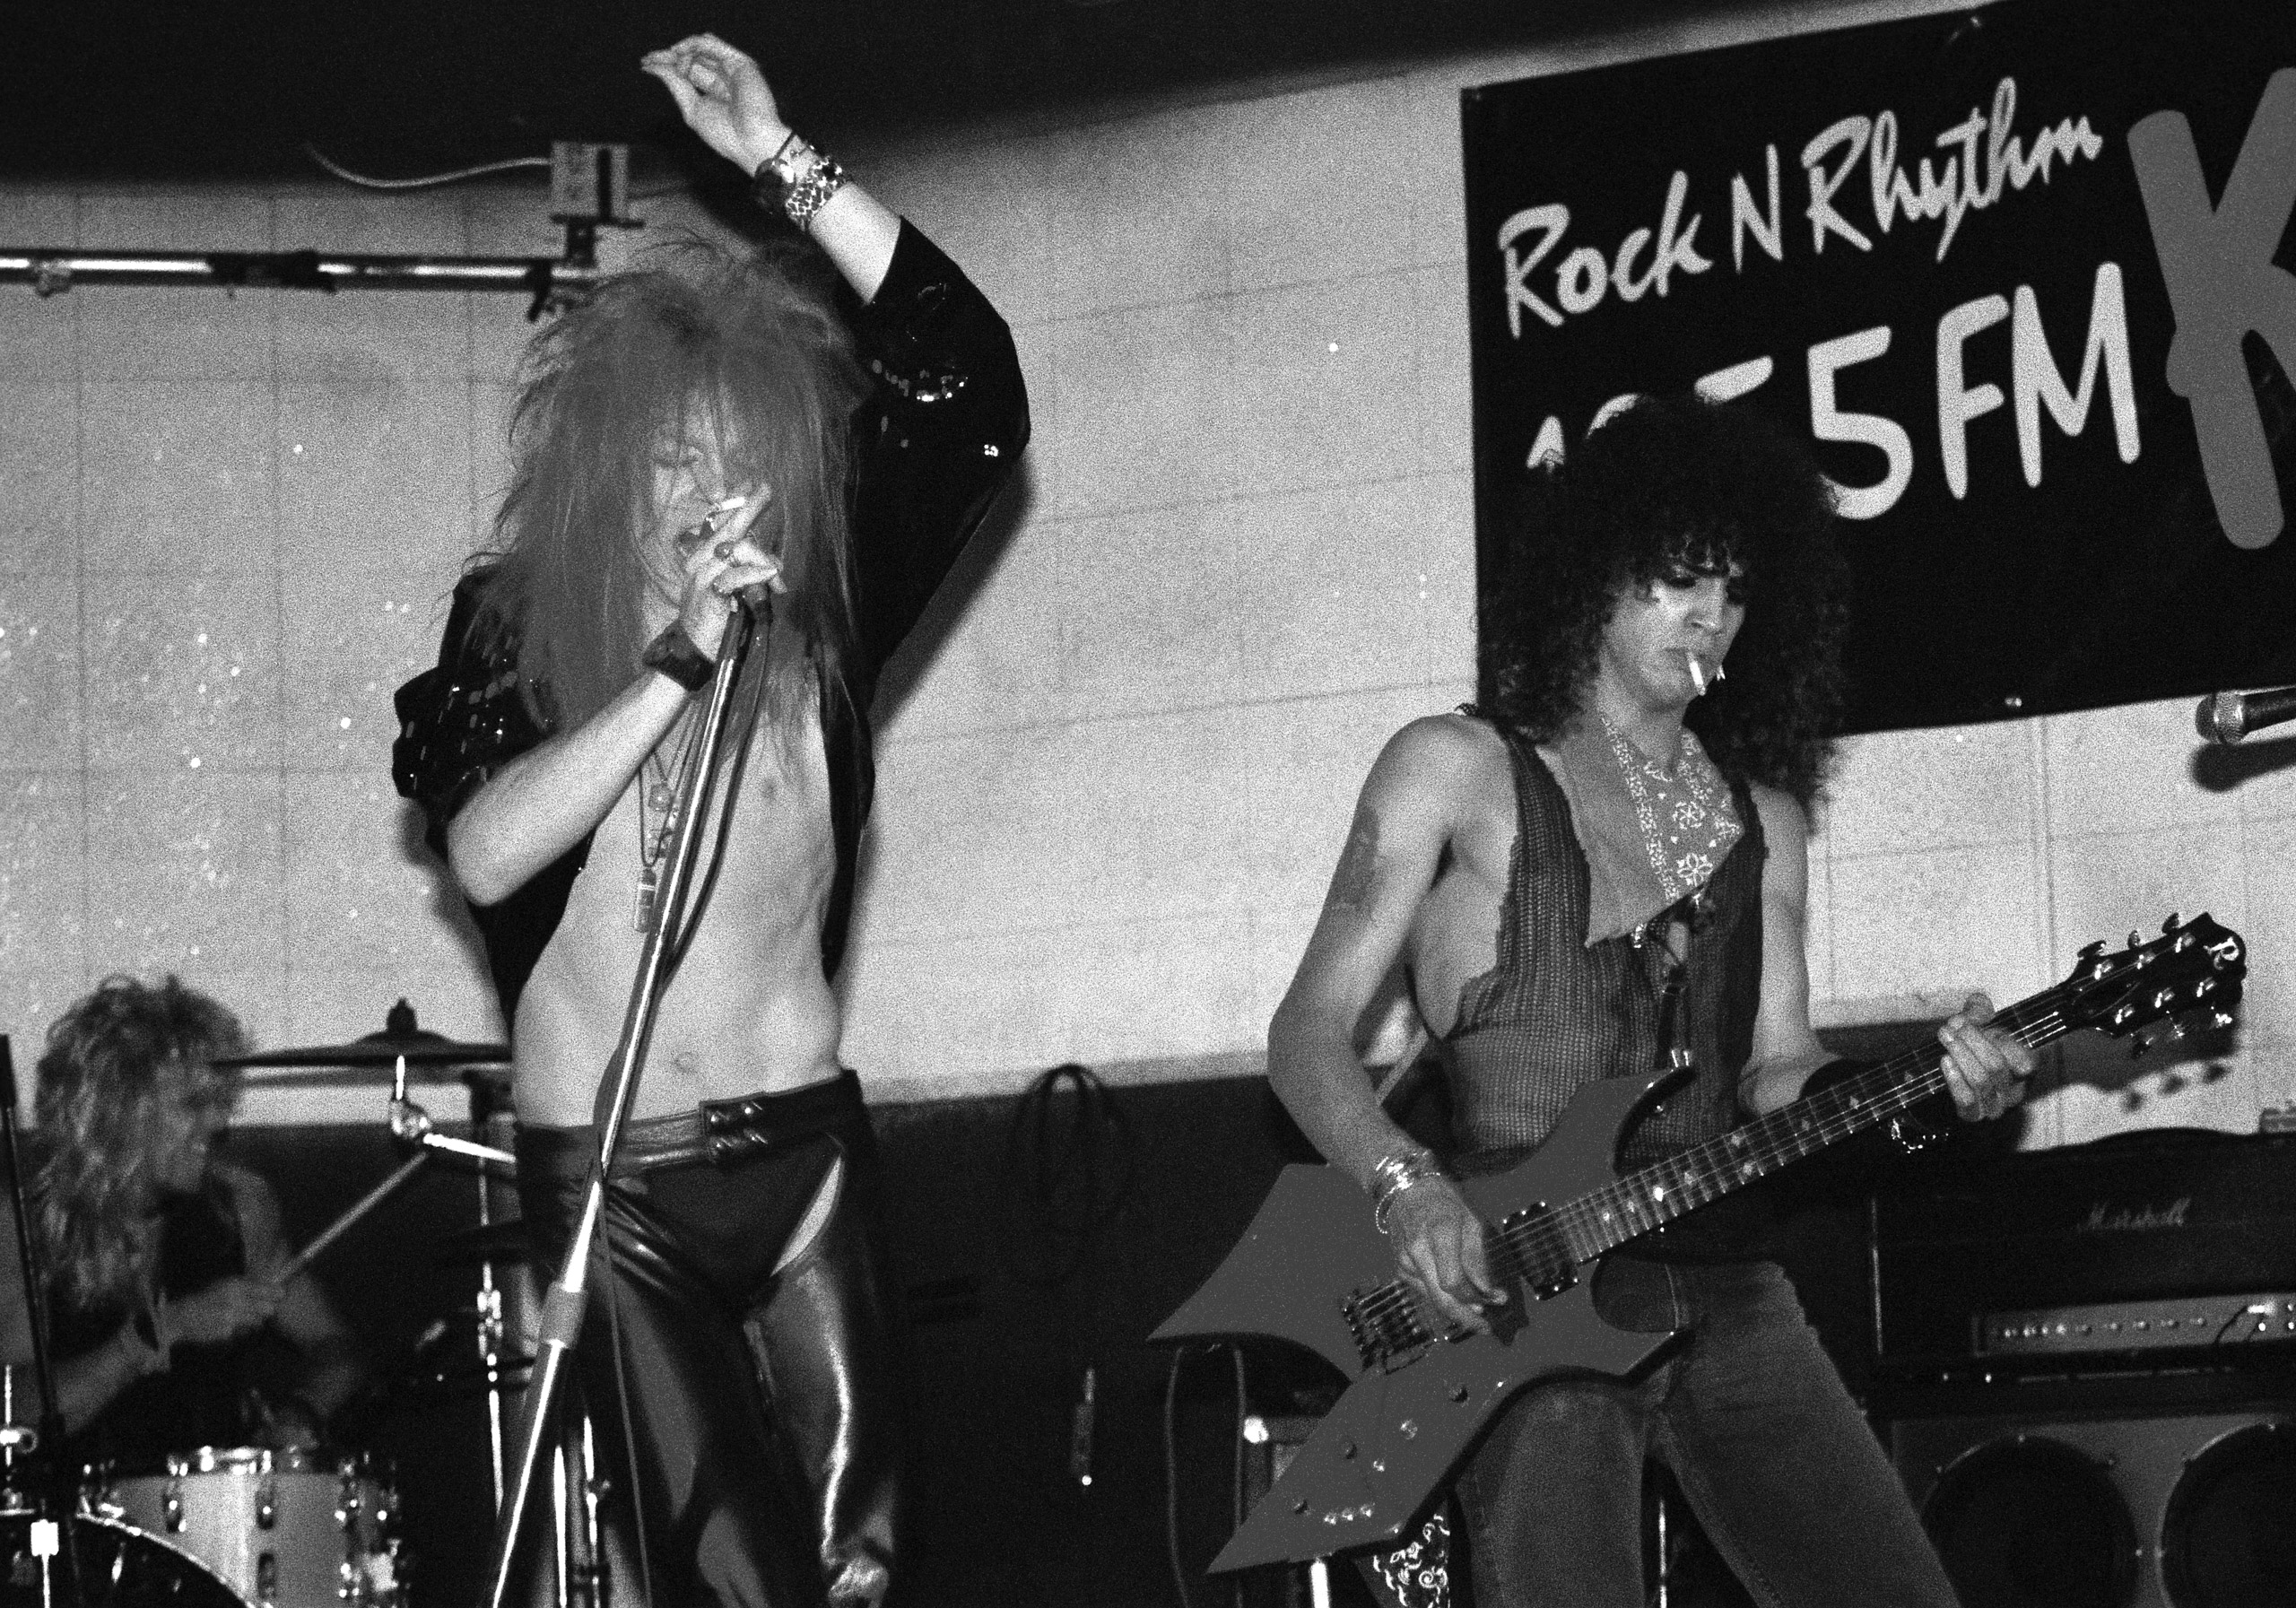 Steven Adler, Axl Rose and Slash of Guns n' Roses perform for a very small crowd at Madame Wong's East on July 4, 1985  in Los Angeles